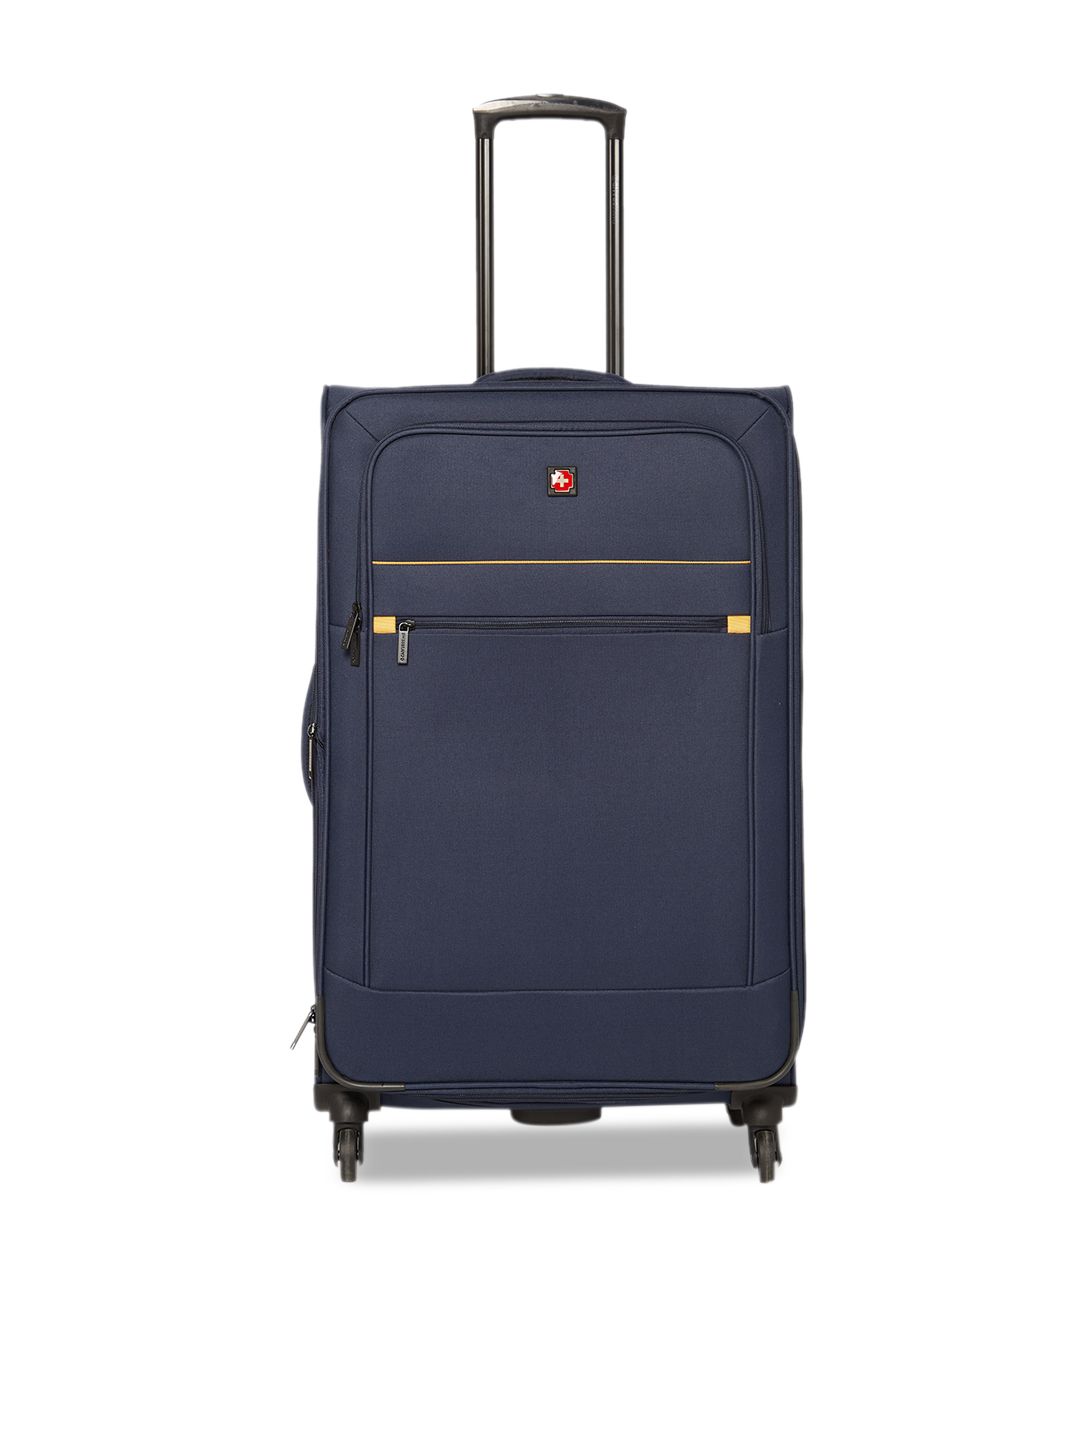 SWISS BRAND Navy Blue Solid Barcelona 360-Degree Rotation Soft-Sided Large Trolley Suitcase Price in India